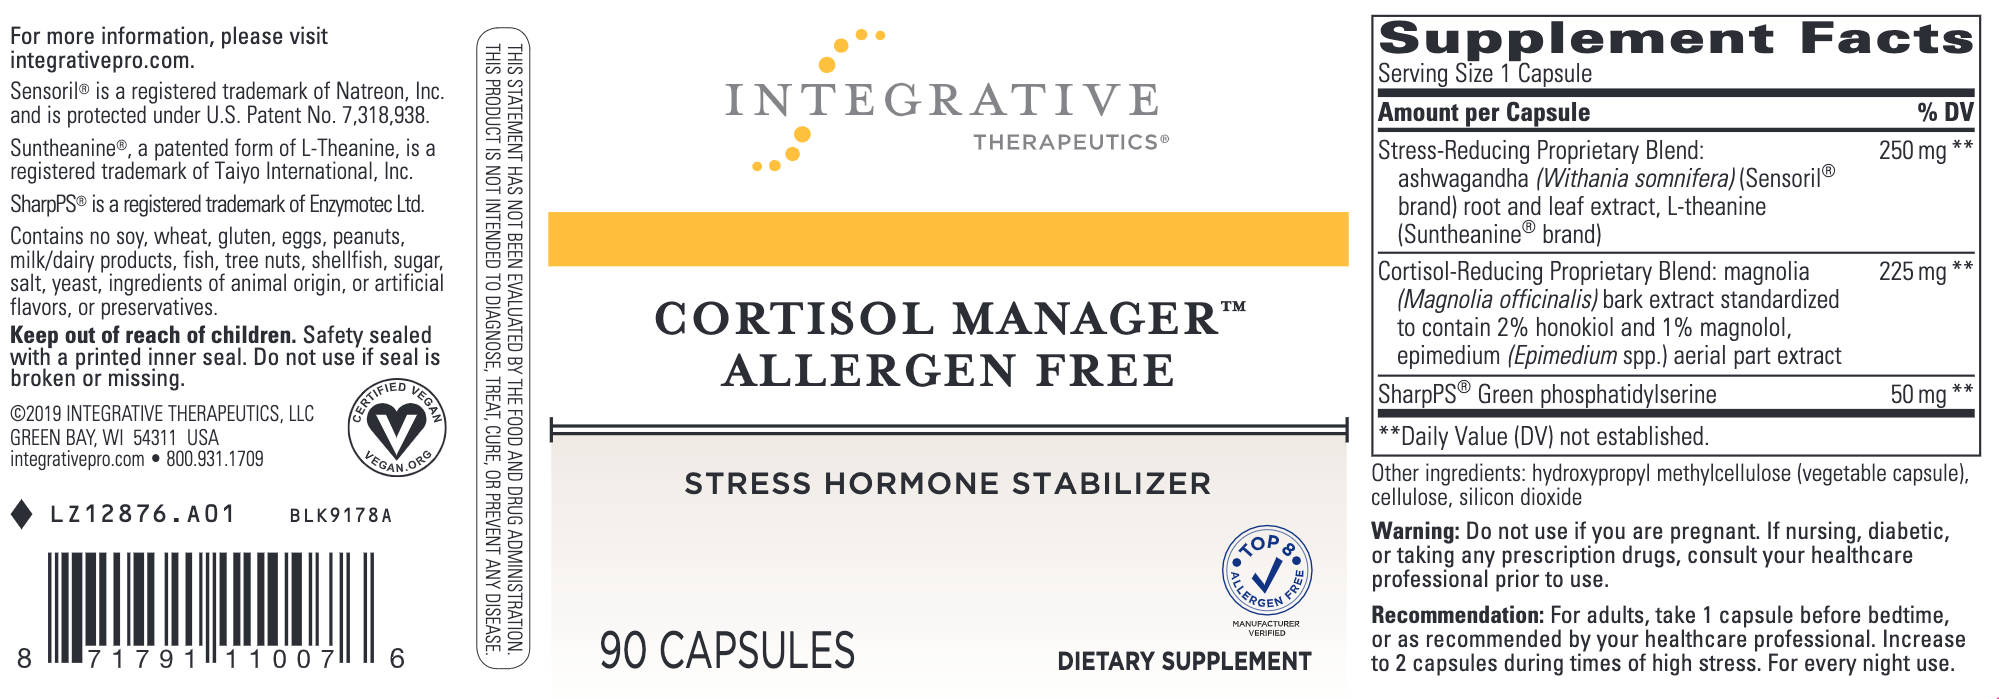 Cortisol Manager (Allergen Free)-Vitamins & Supplements-Integrative Therapeutics-90 Capsules-Pine Street Clinic